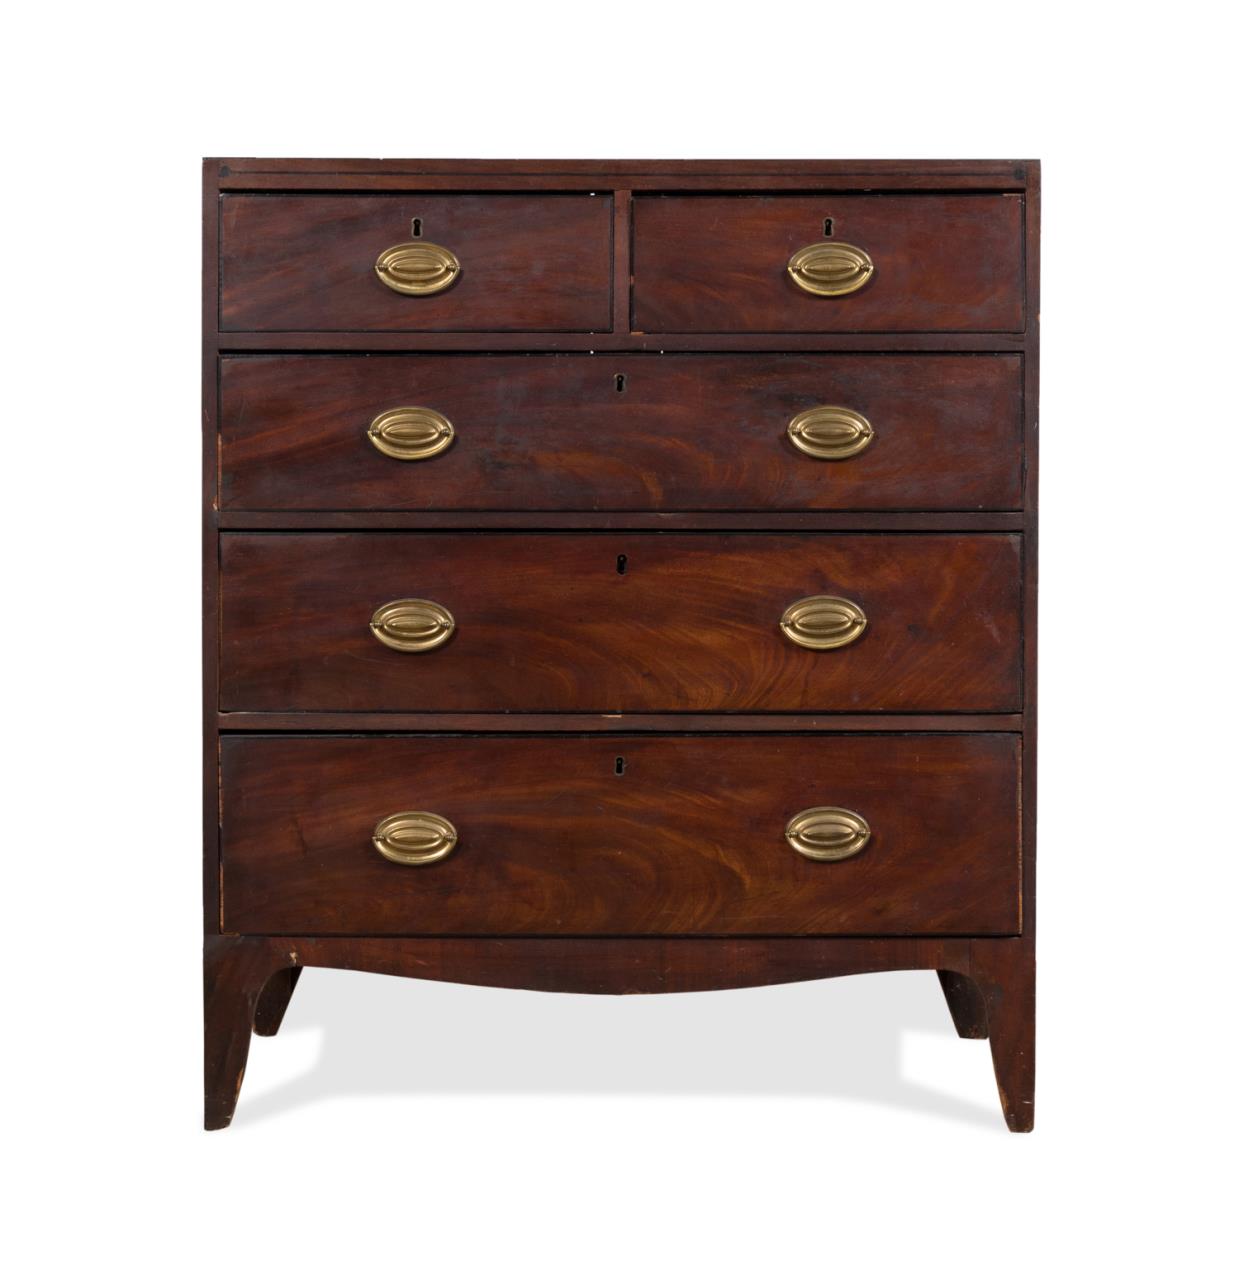 GEORGE III STYLE MAHOGANY CHEST 2f96af